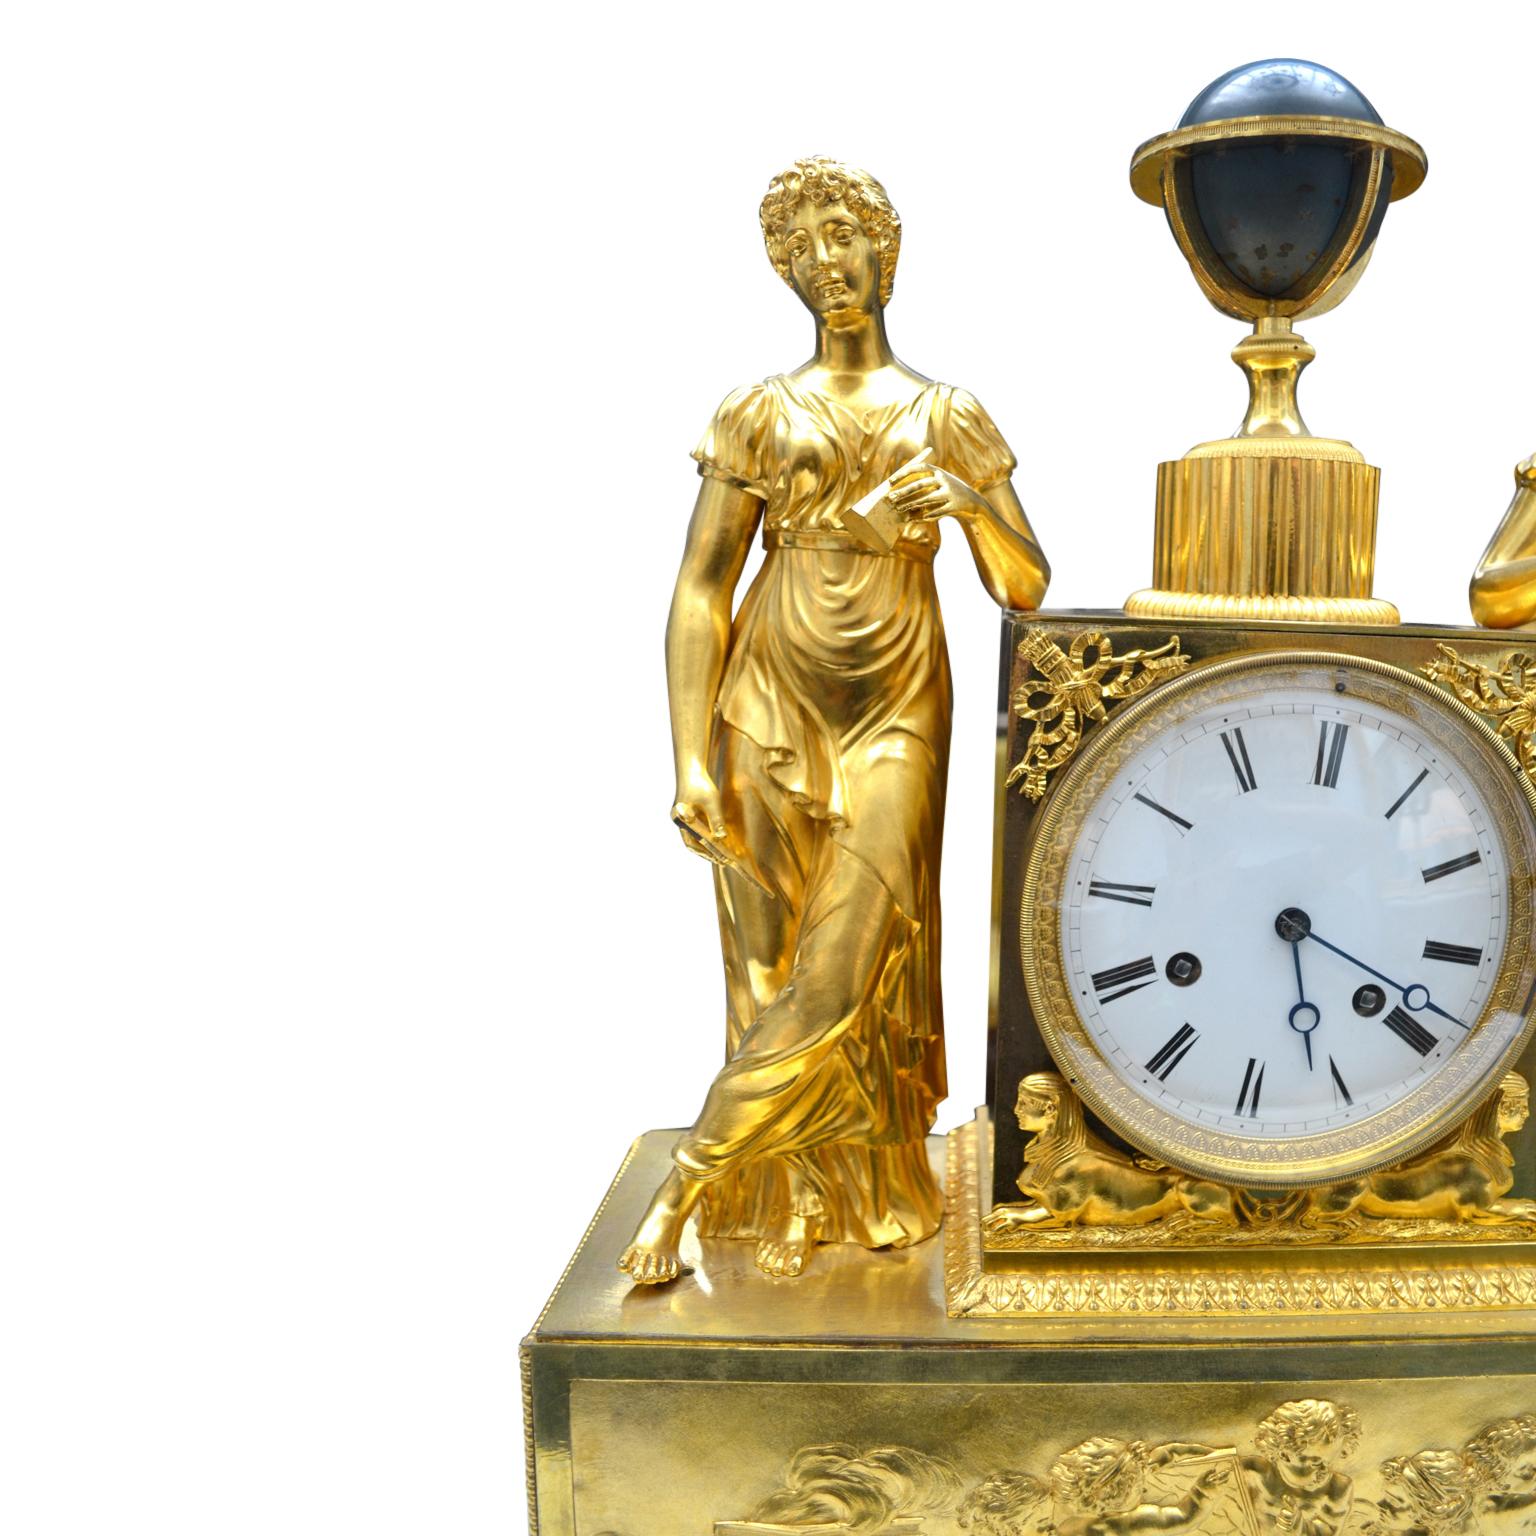  French Empire Gilt Bronze Allegorical Clock Depicting the Astronomical Sciences For Sale 1